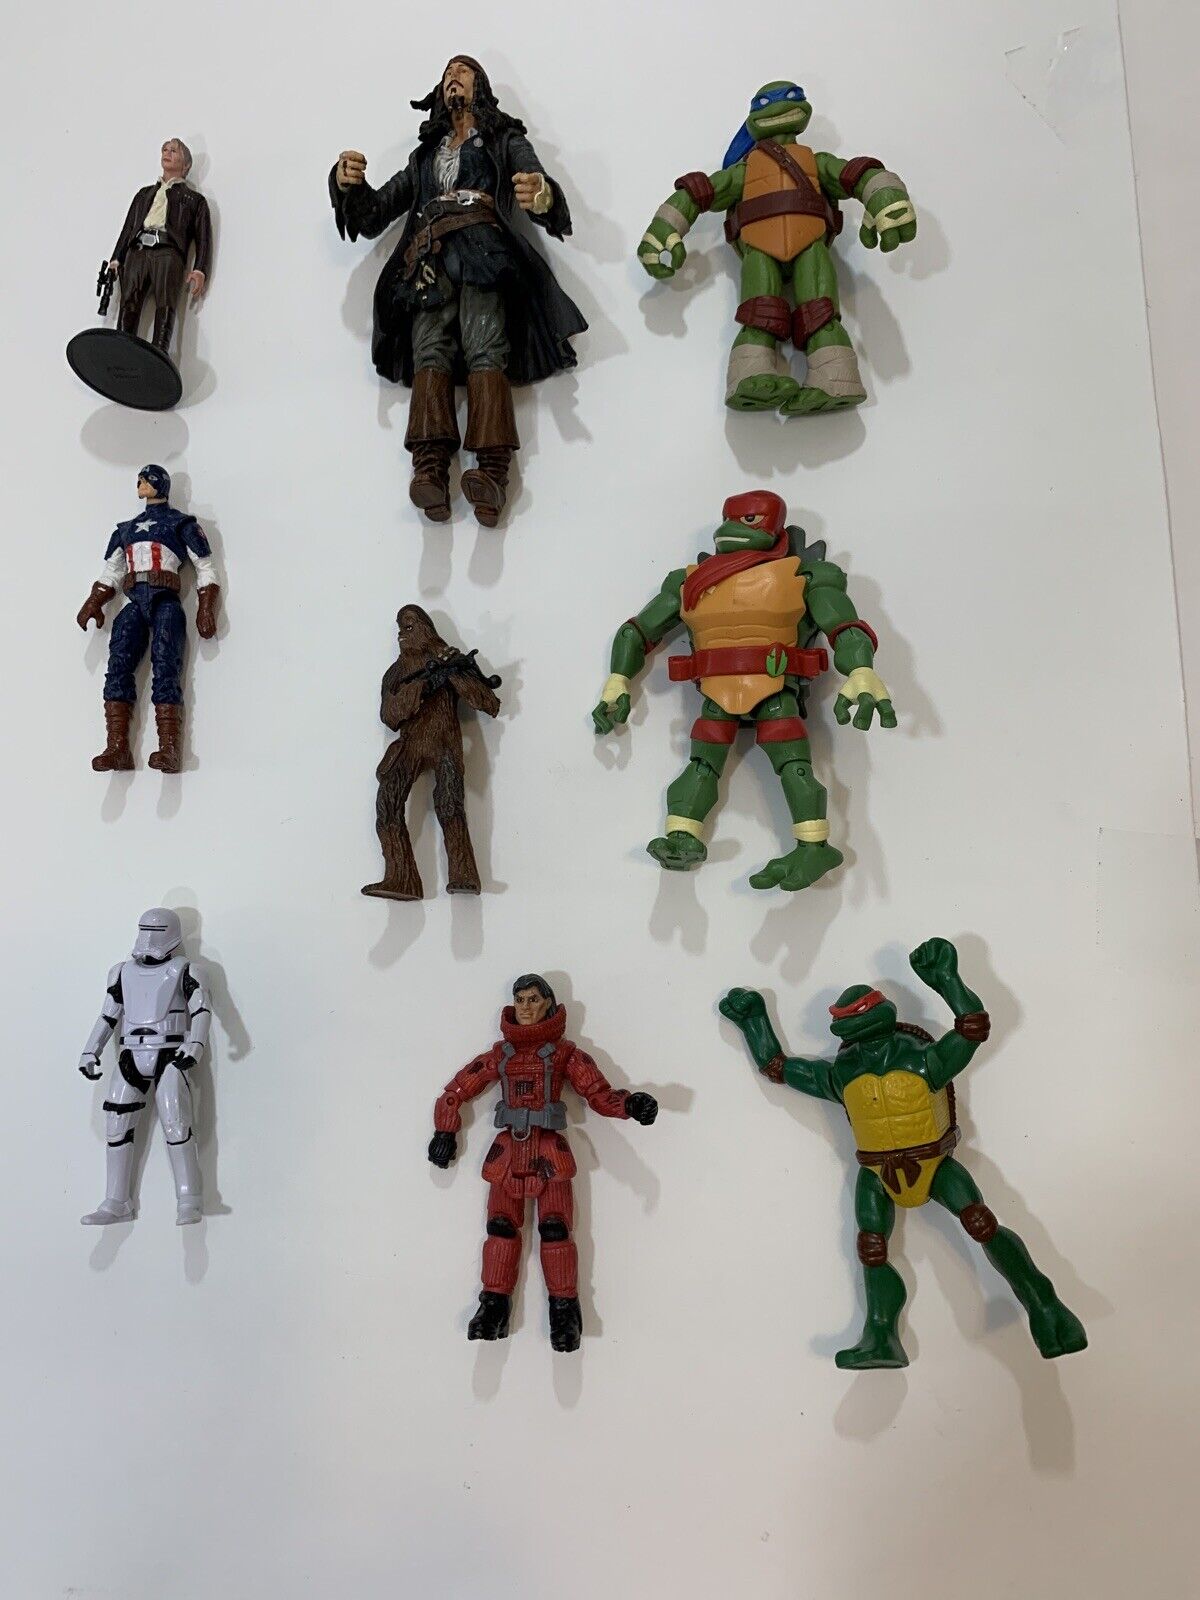 Yay! Action Figures Used Including Ninja Turtles, Jack Sparrow, Star Wars & More